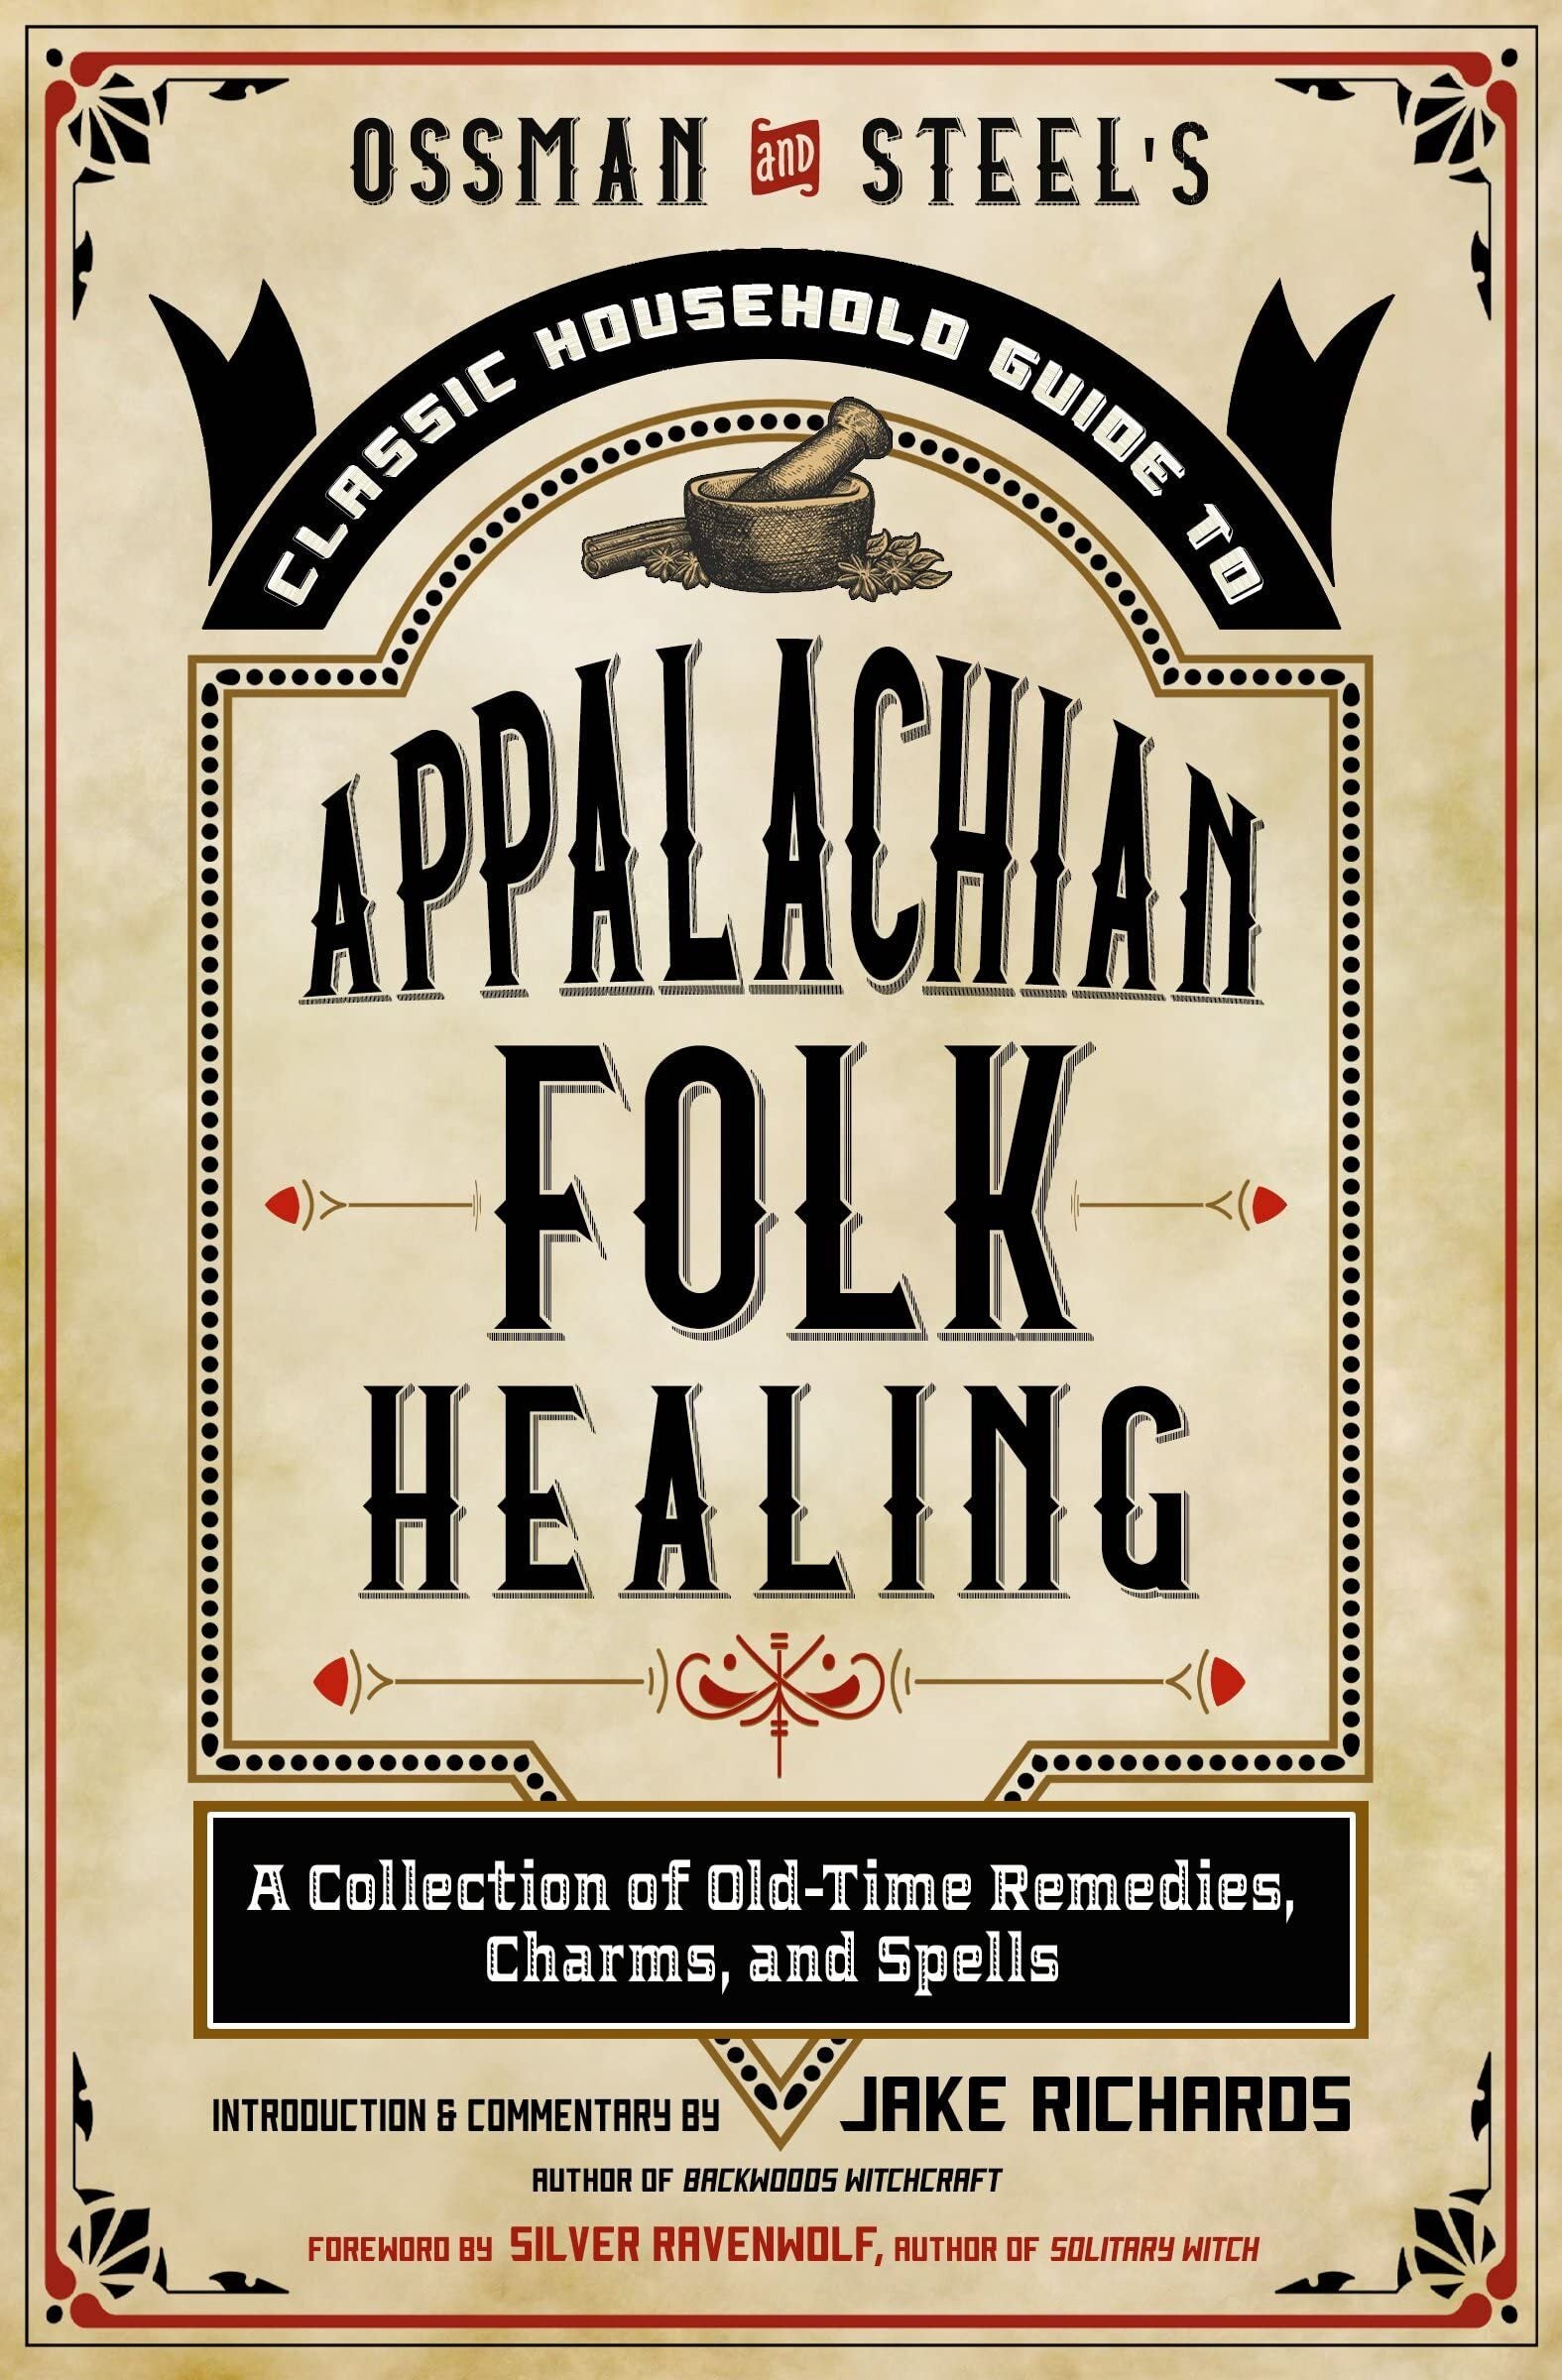 Household Guide to Appalachian Folk Healing: A Collection of Old-Time Remedies, Charms, and Spells